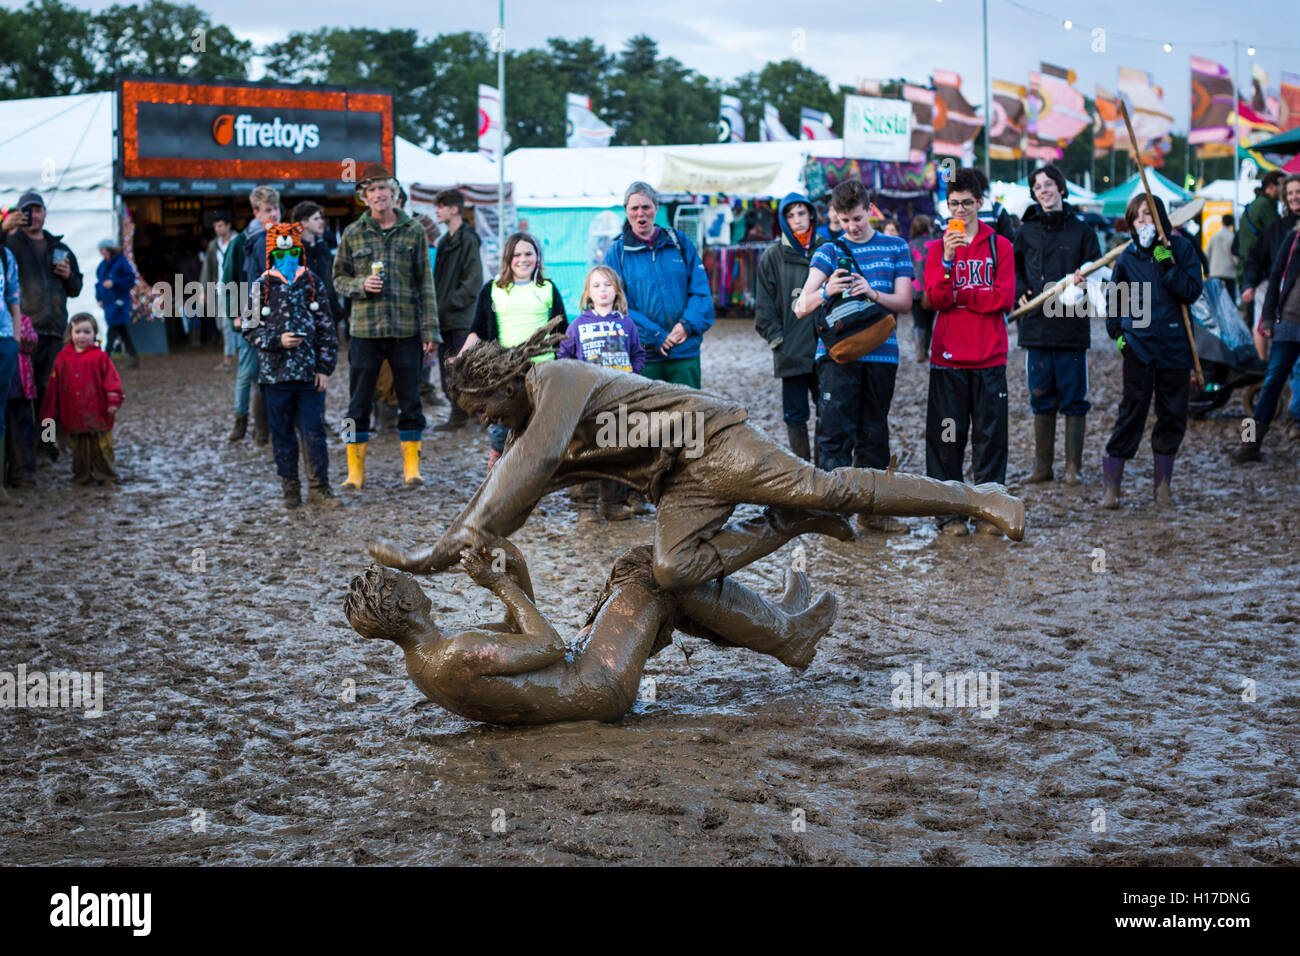 Friends mud wrestling at the 2015 Womad festival, Malmesbury, UK. Stock Photo